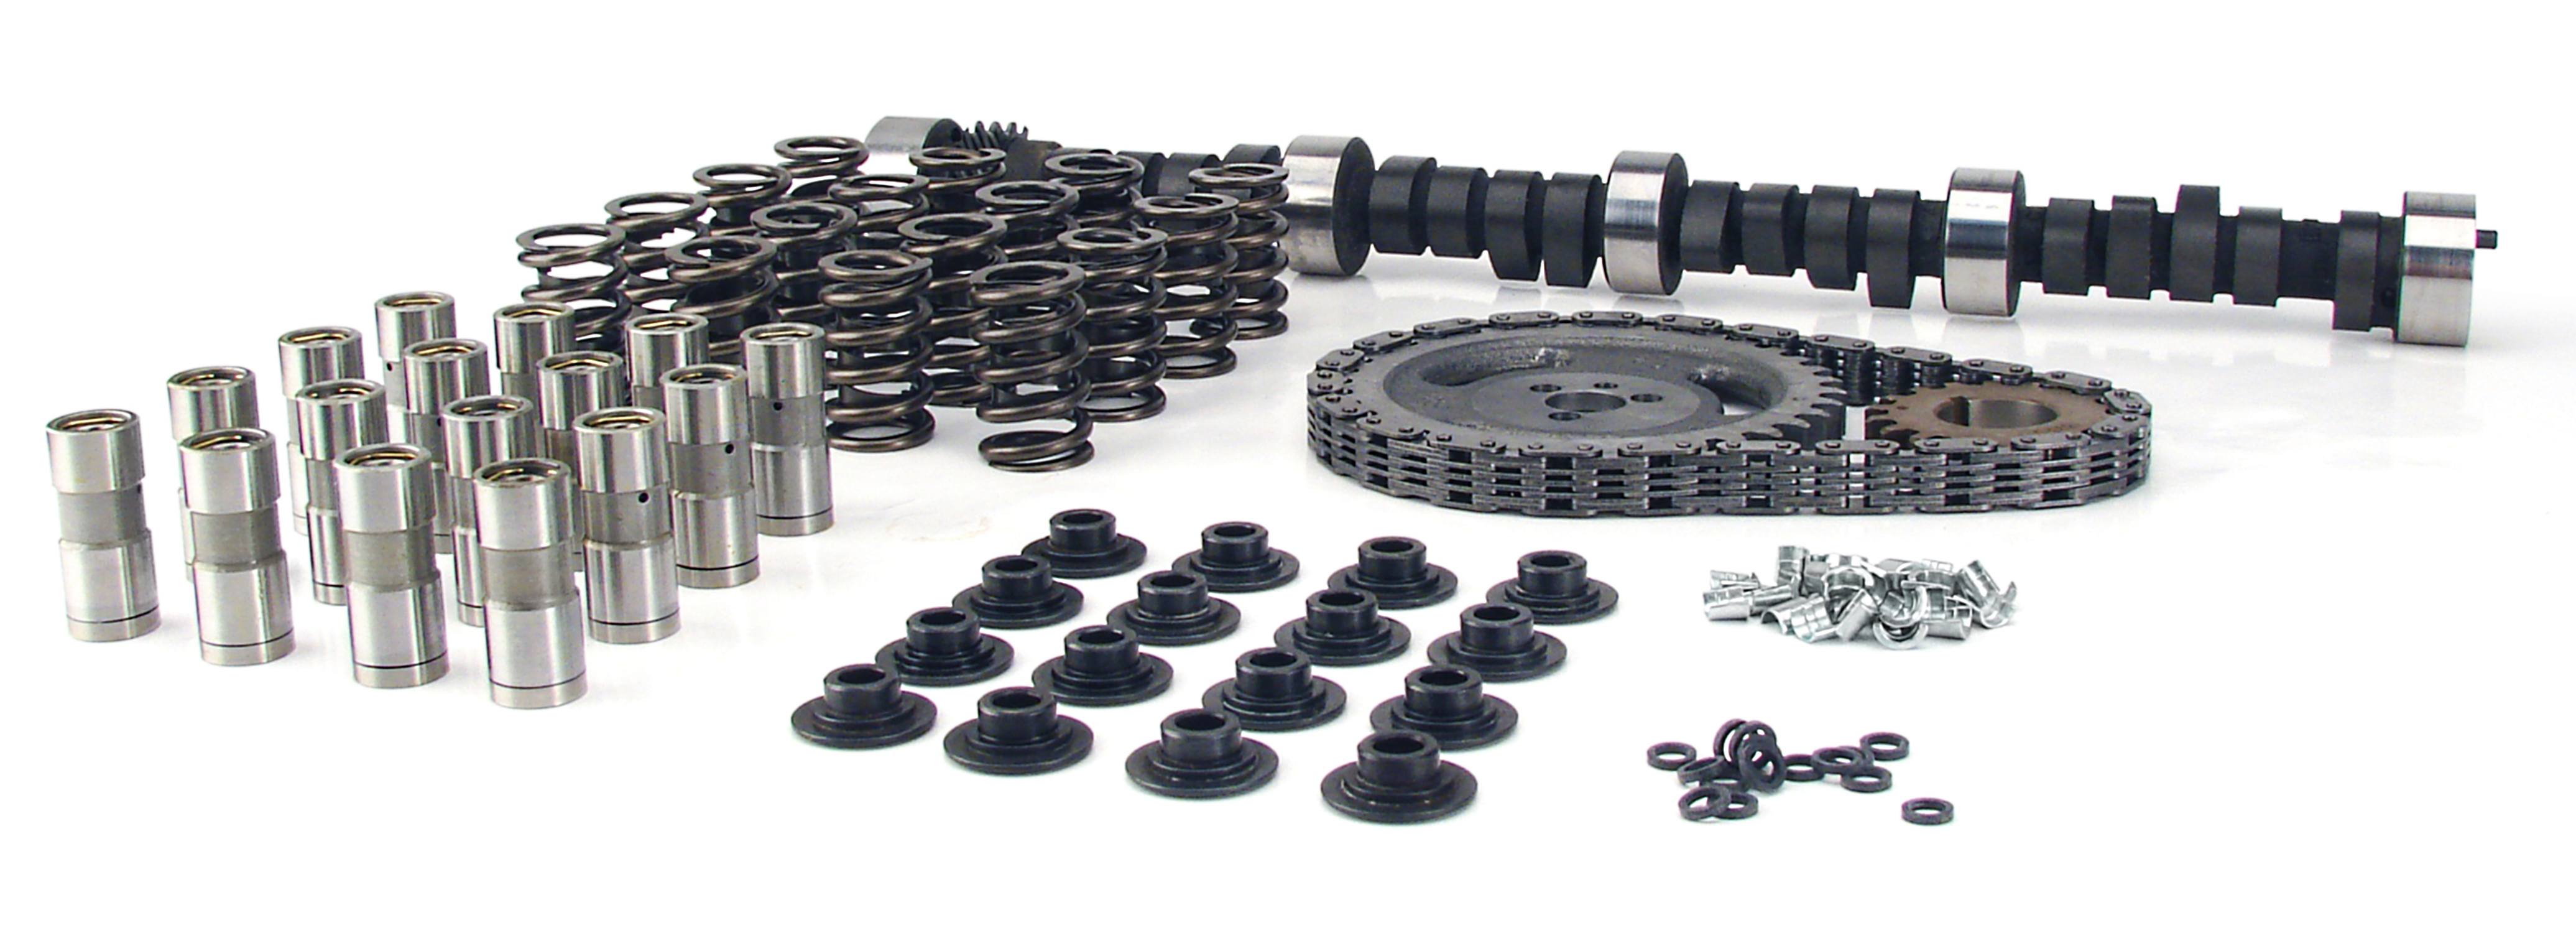 Set of 16 Single Springs w/ 1.254" O.D., 1.254" I.D., 1.700" Installed Height - K12-672-4